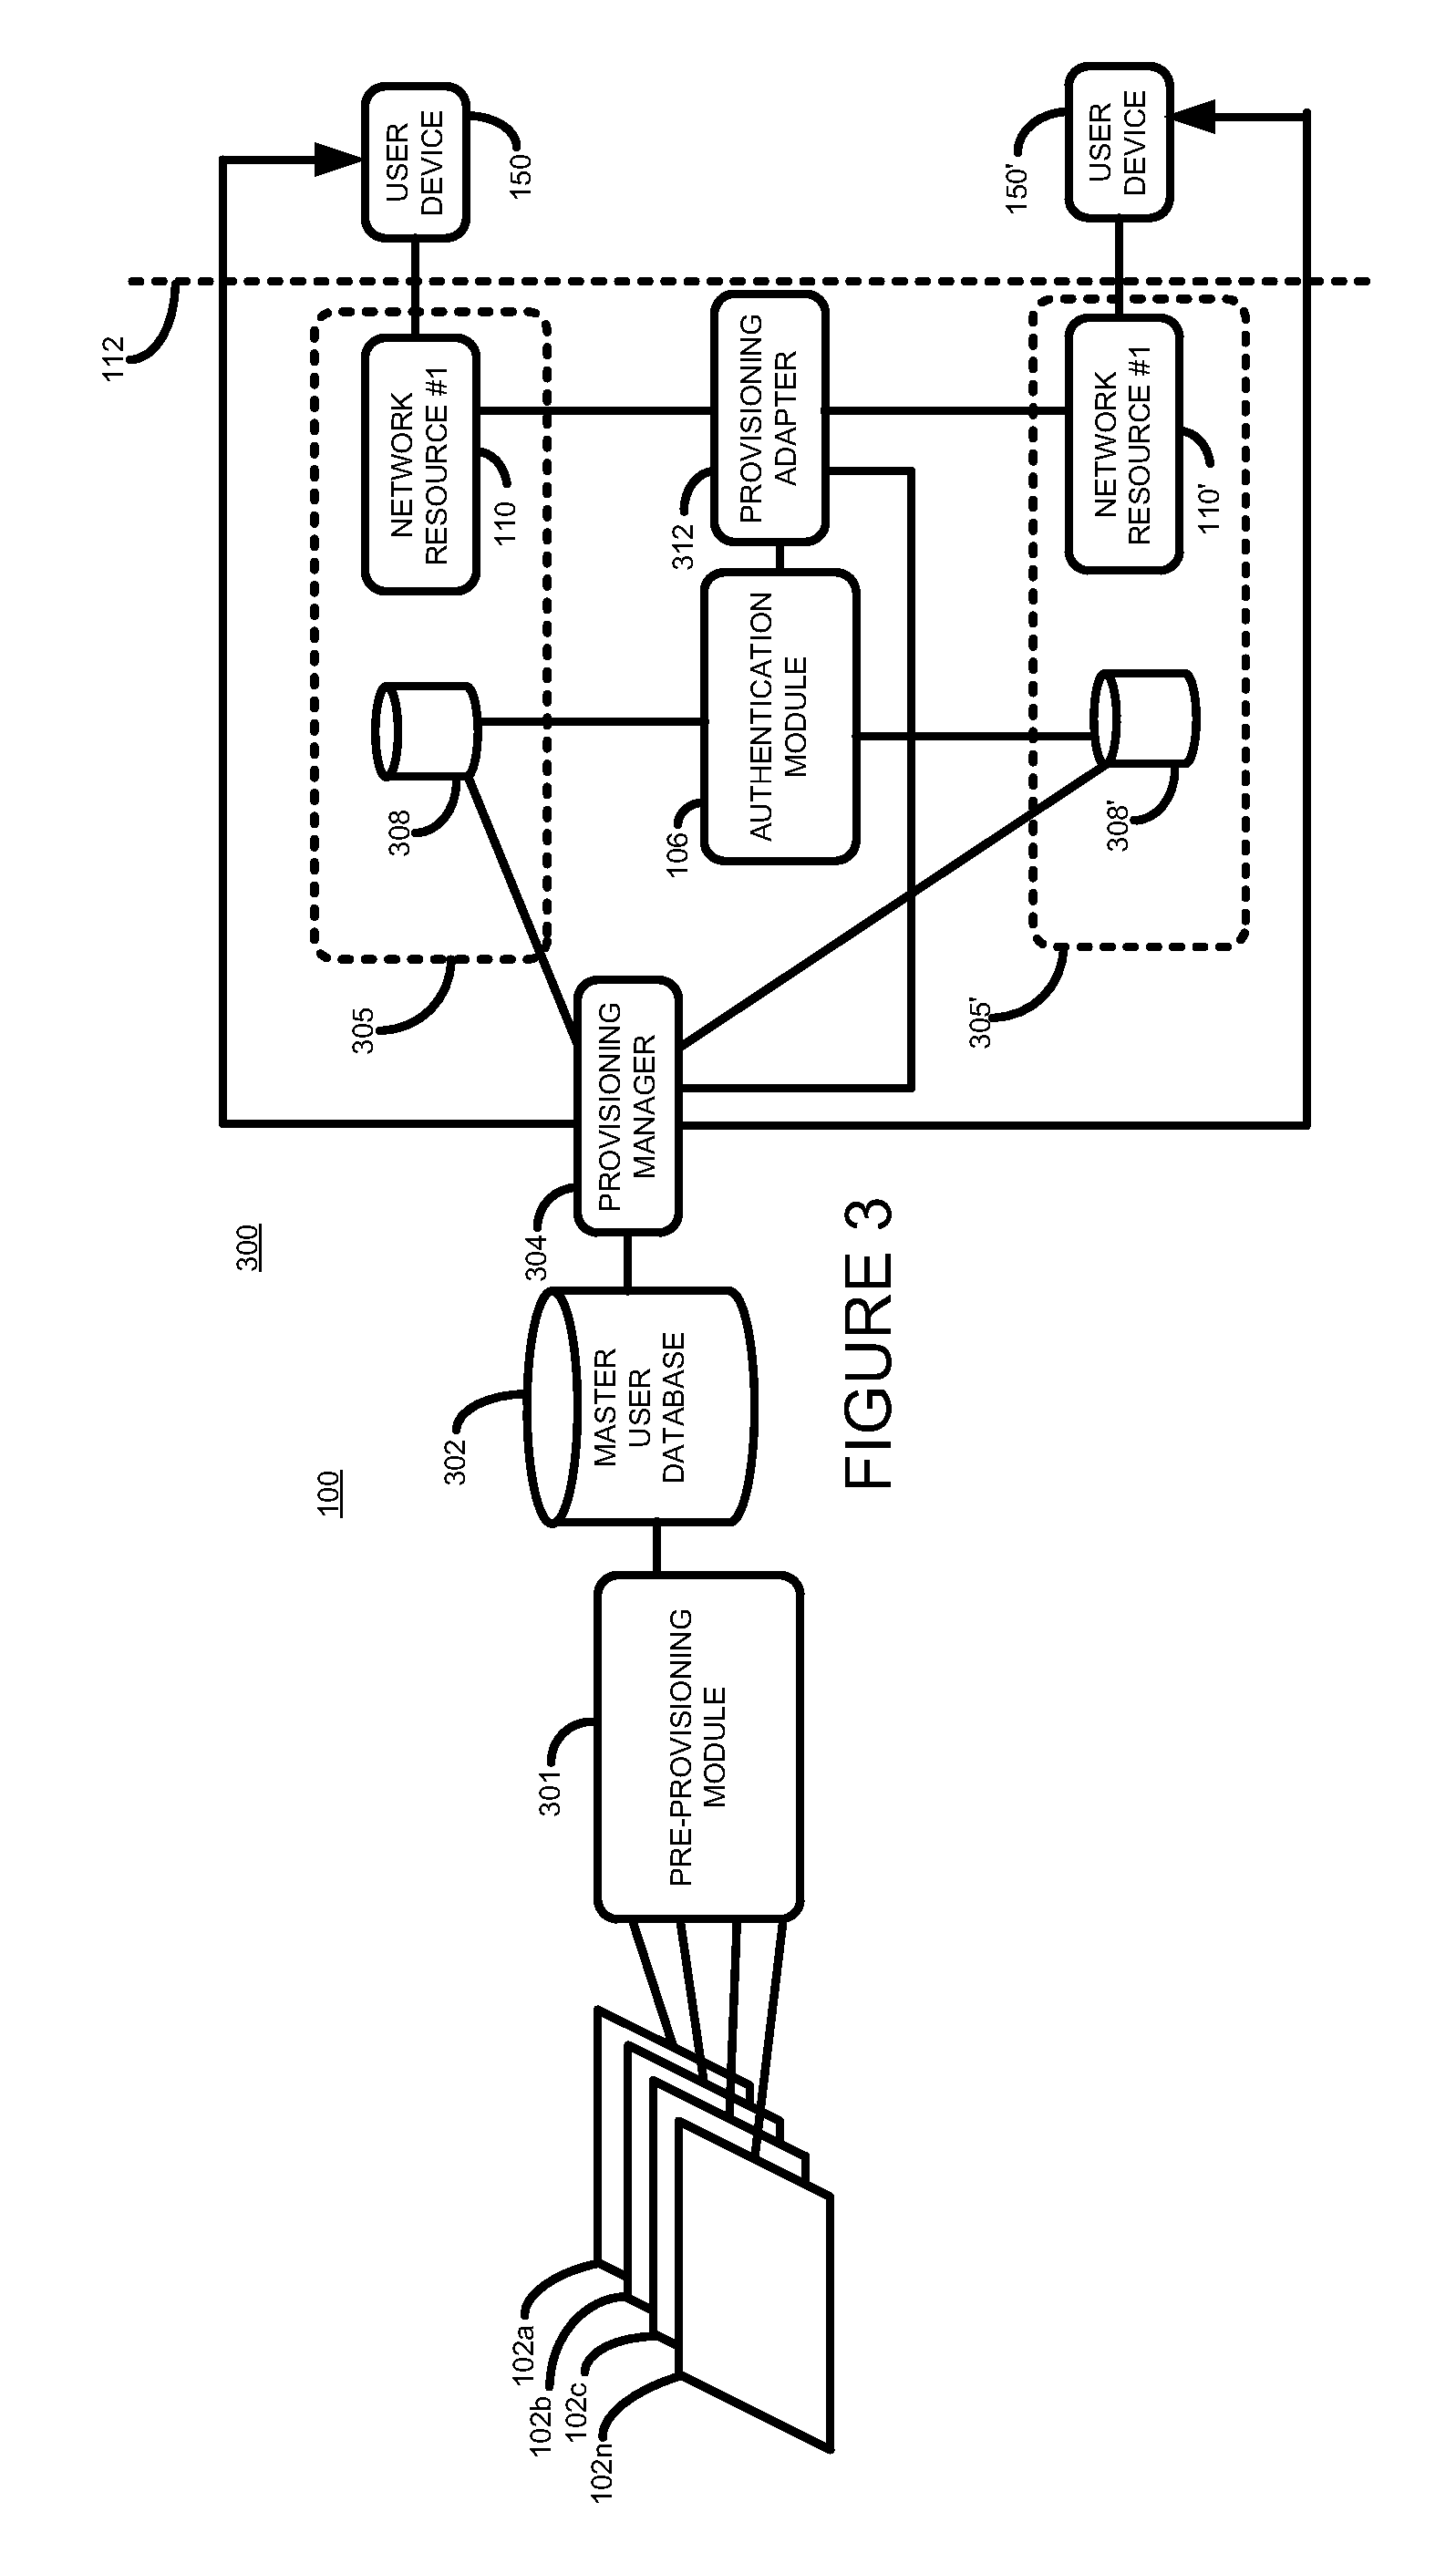 Method and apparatus for controlling access to a network resource